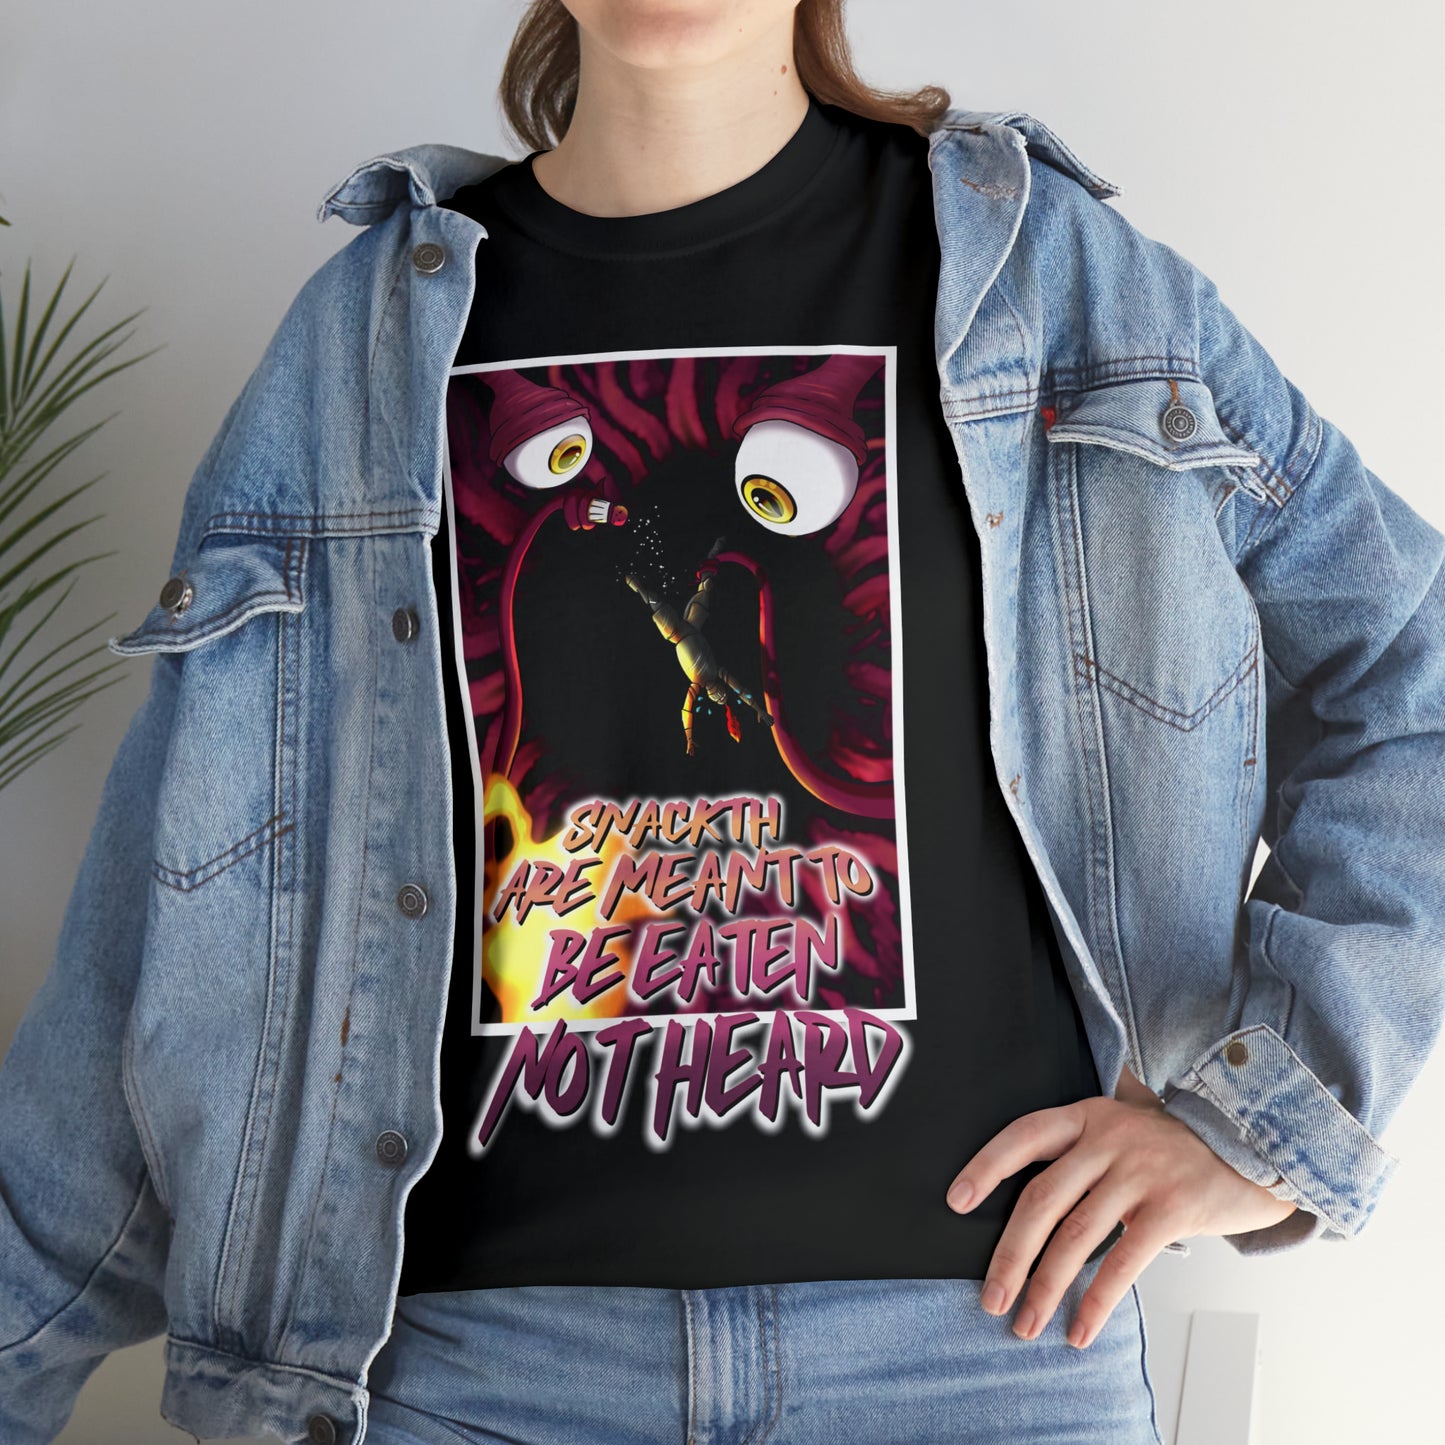 'Snackth Are Meant To Be Eaten Not Heard' Lou Carcoilh Unisex T Shirt